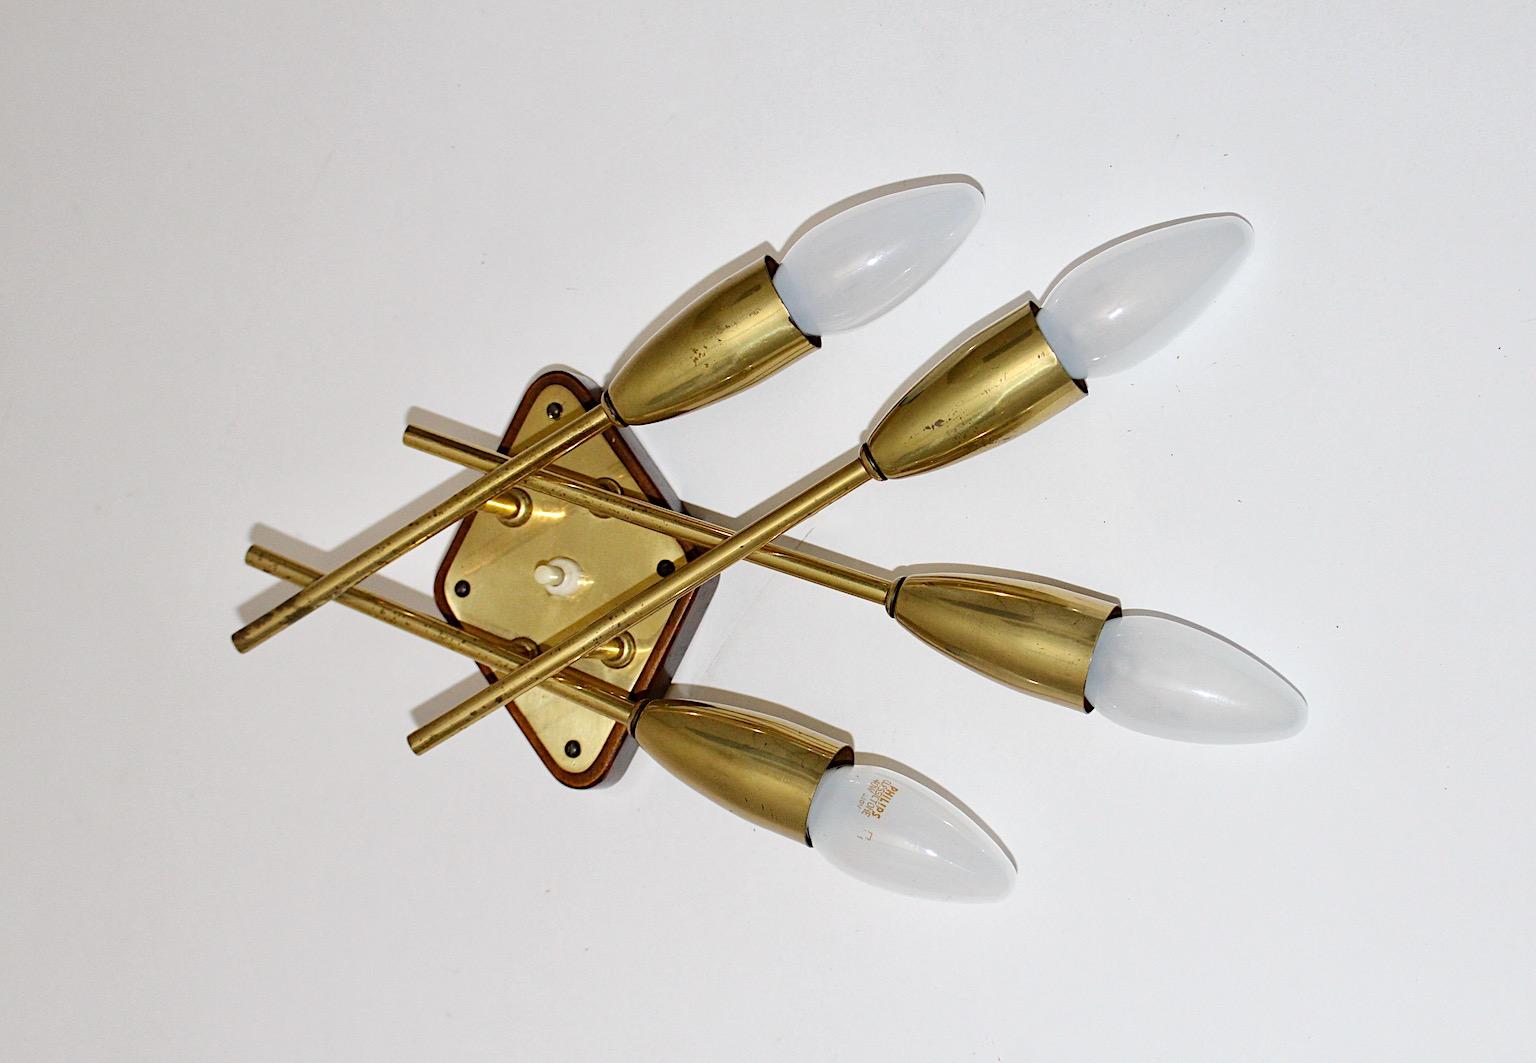 Brass Beech Mid-Century Modern Rupert Nikoll Sconce Wall Light, 1950s, Austria In Good Condition For Sale In Vienna, AT